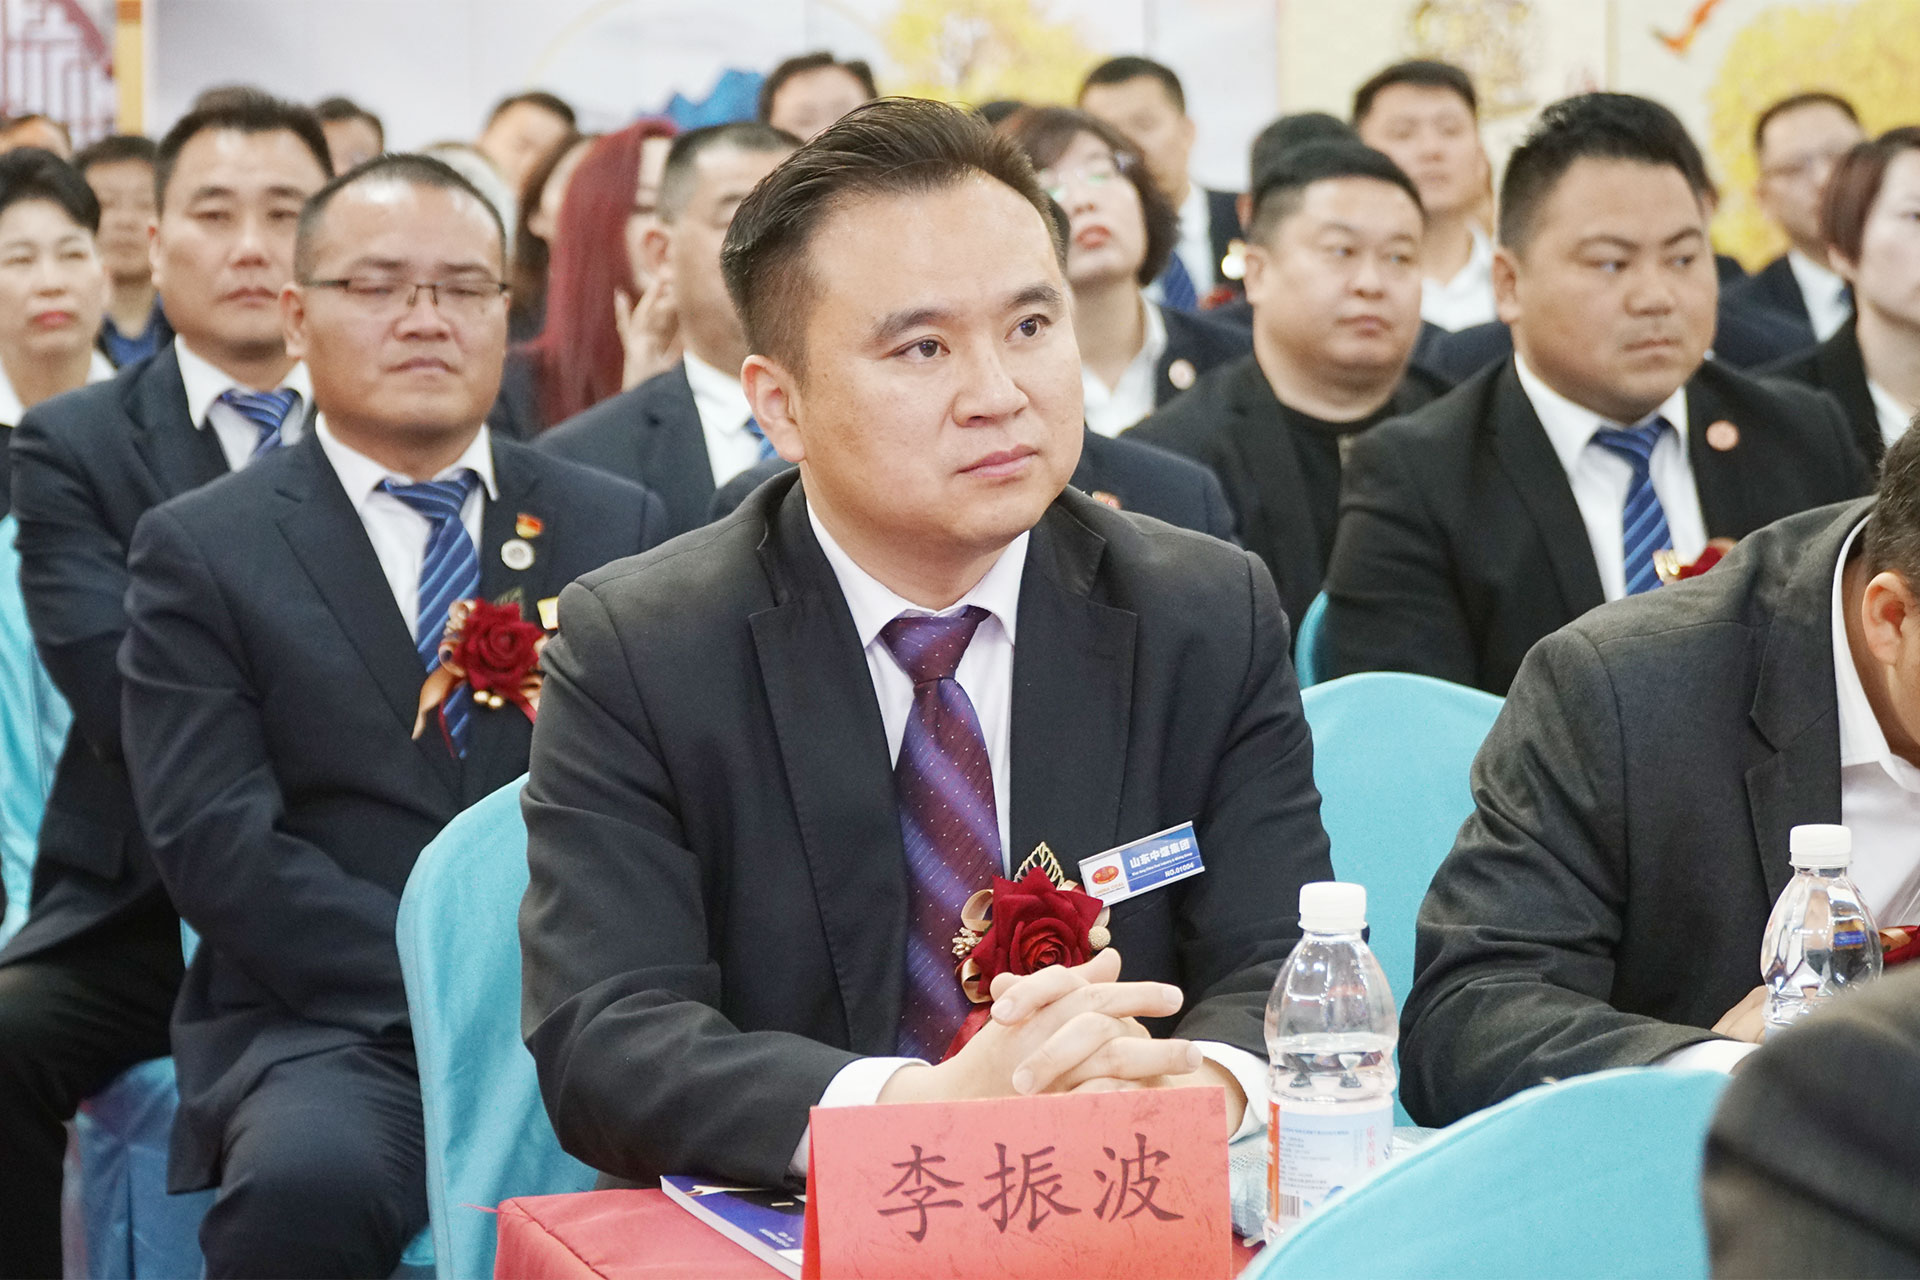 China Coal Group Participate In The 3rd First Member Congress Of Jining Weishan Lake Development Promotion Association